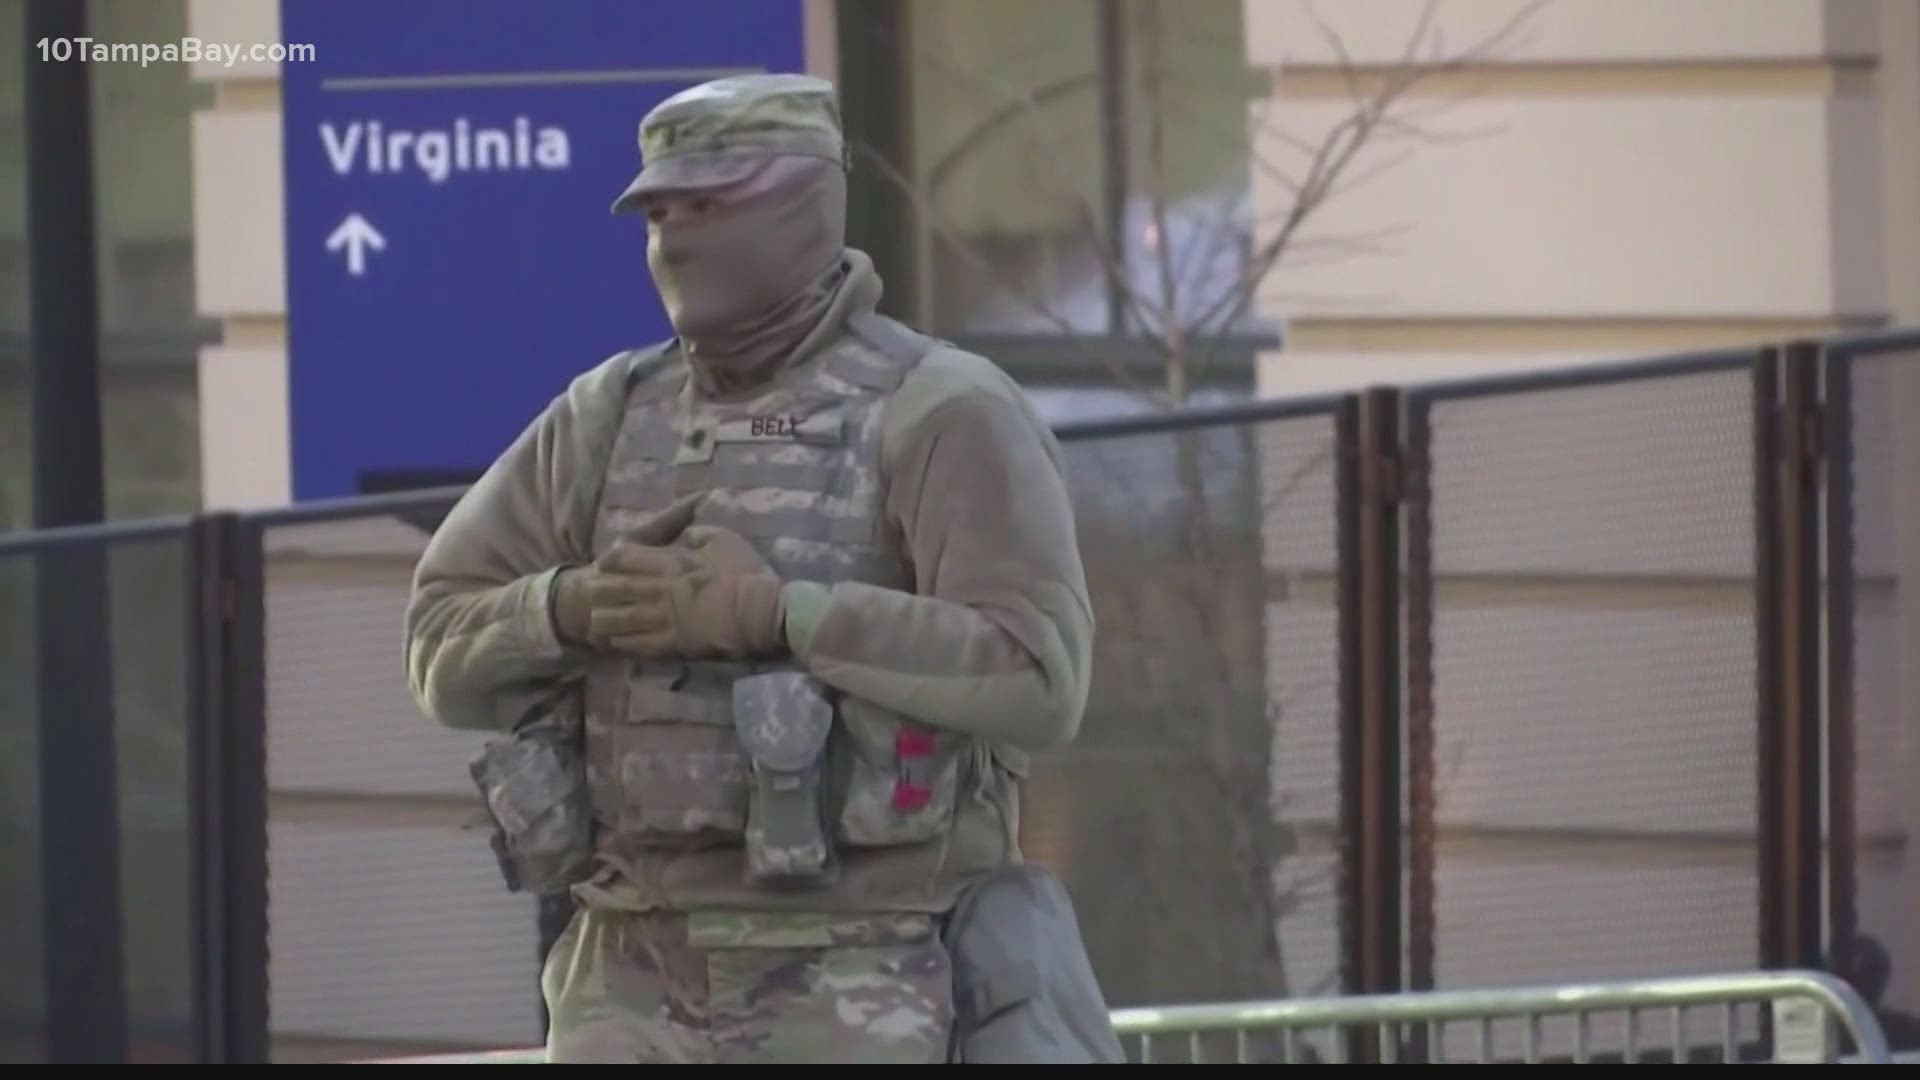 Soldiers from Florida were deployed to Washington, D.C. ahead of President Joe Biden's inauguration.